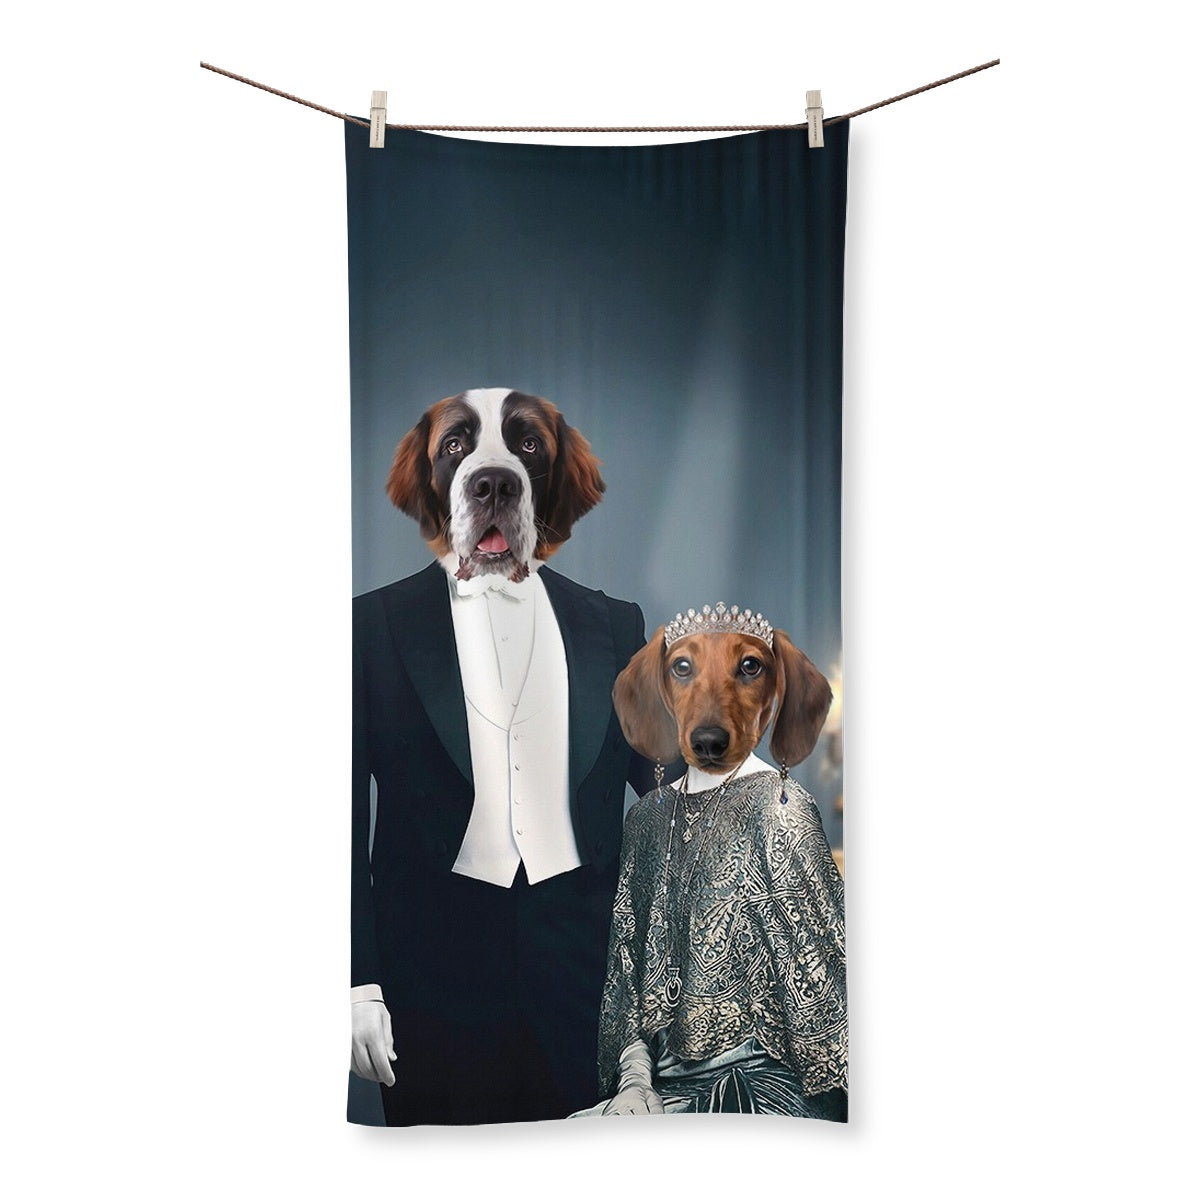 Robert & Cora (Downton Abbey Inspired): Custom Pet Towel, Paw & Glory, paw and glory, portrait of your dog, pet photo studio, print of your dog, dog in uniform, turn pet photos to art